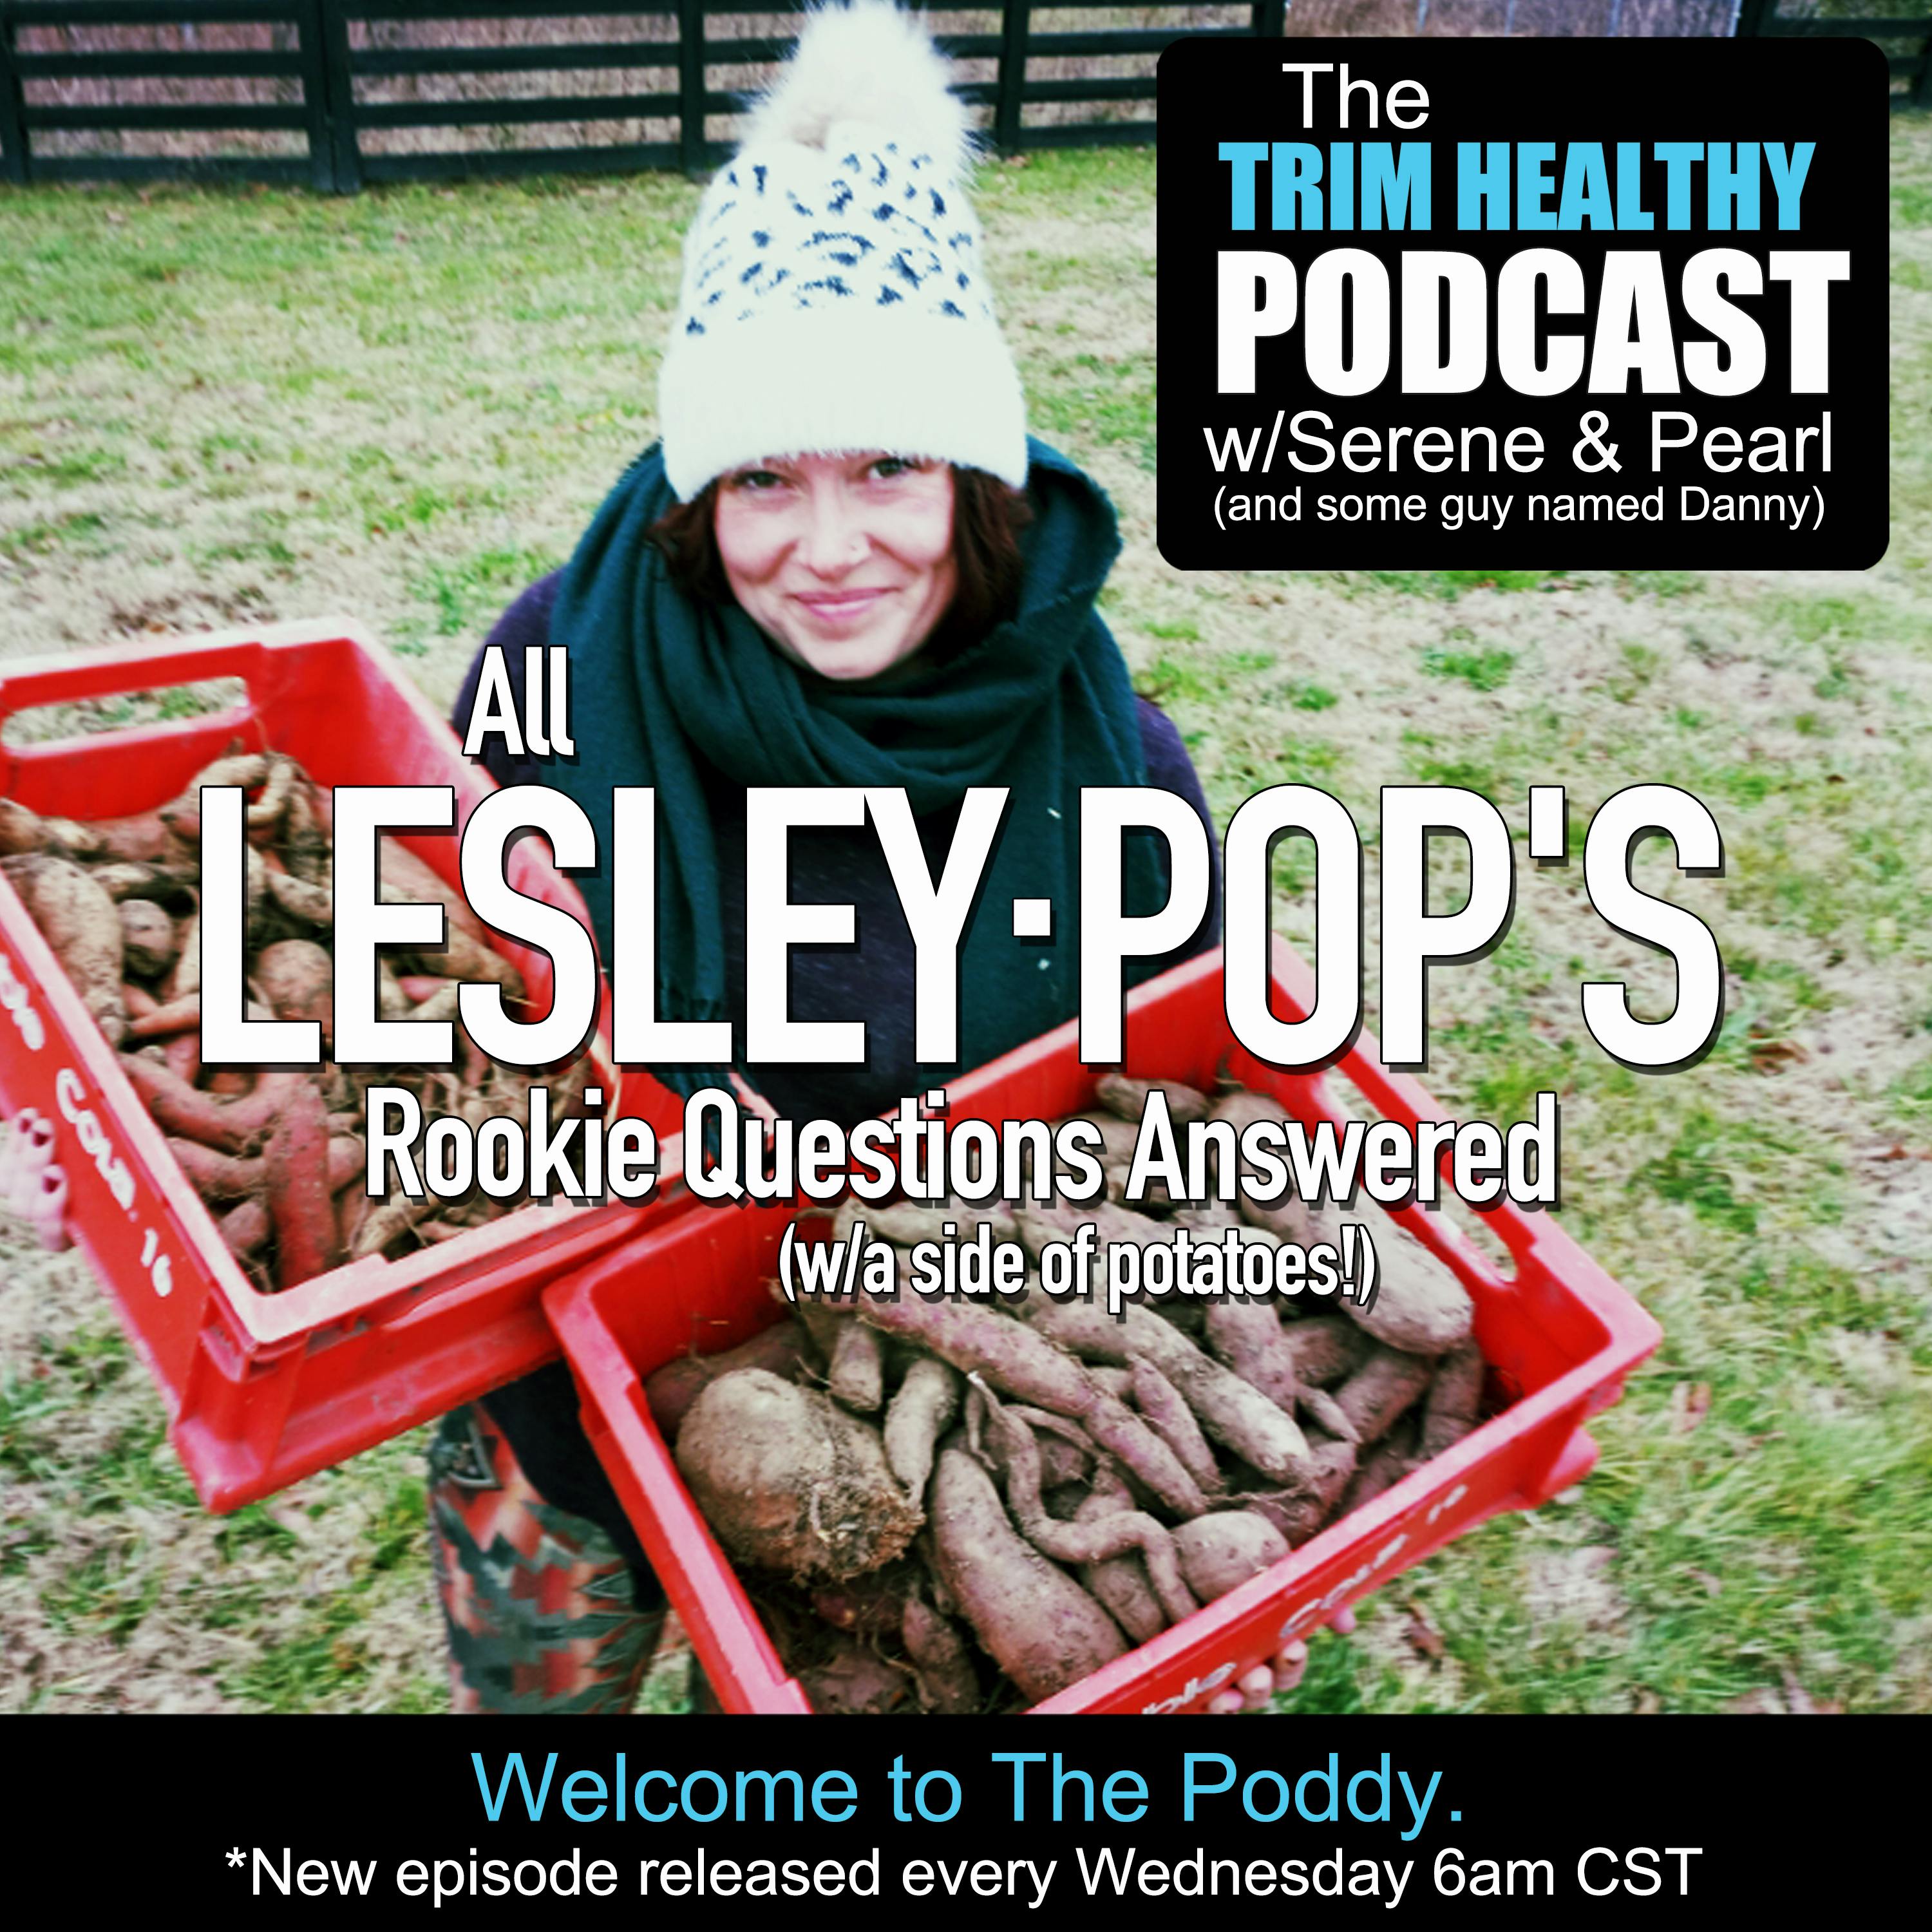 Ep 203: All Lesley-Pop's Rookie Questions Answered (w/a side of potatoes!)